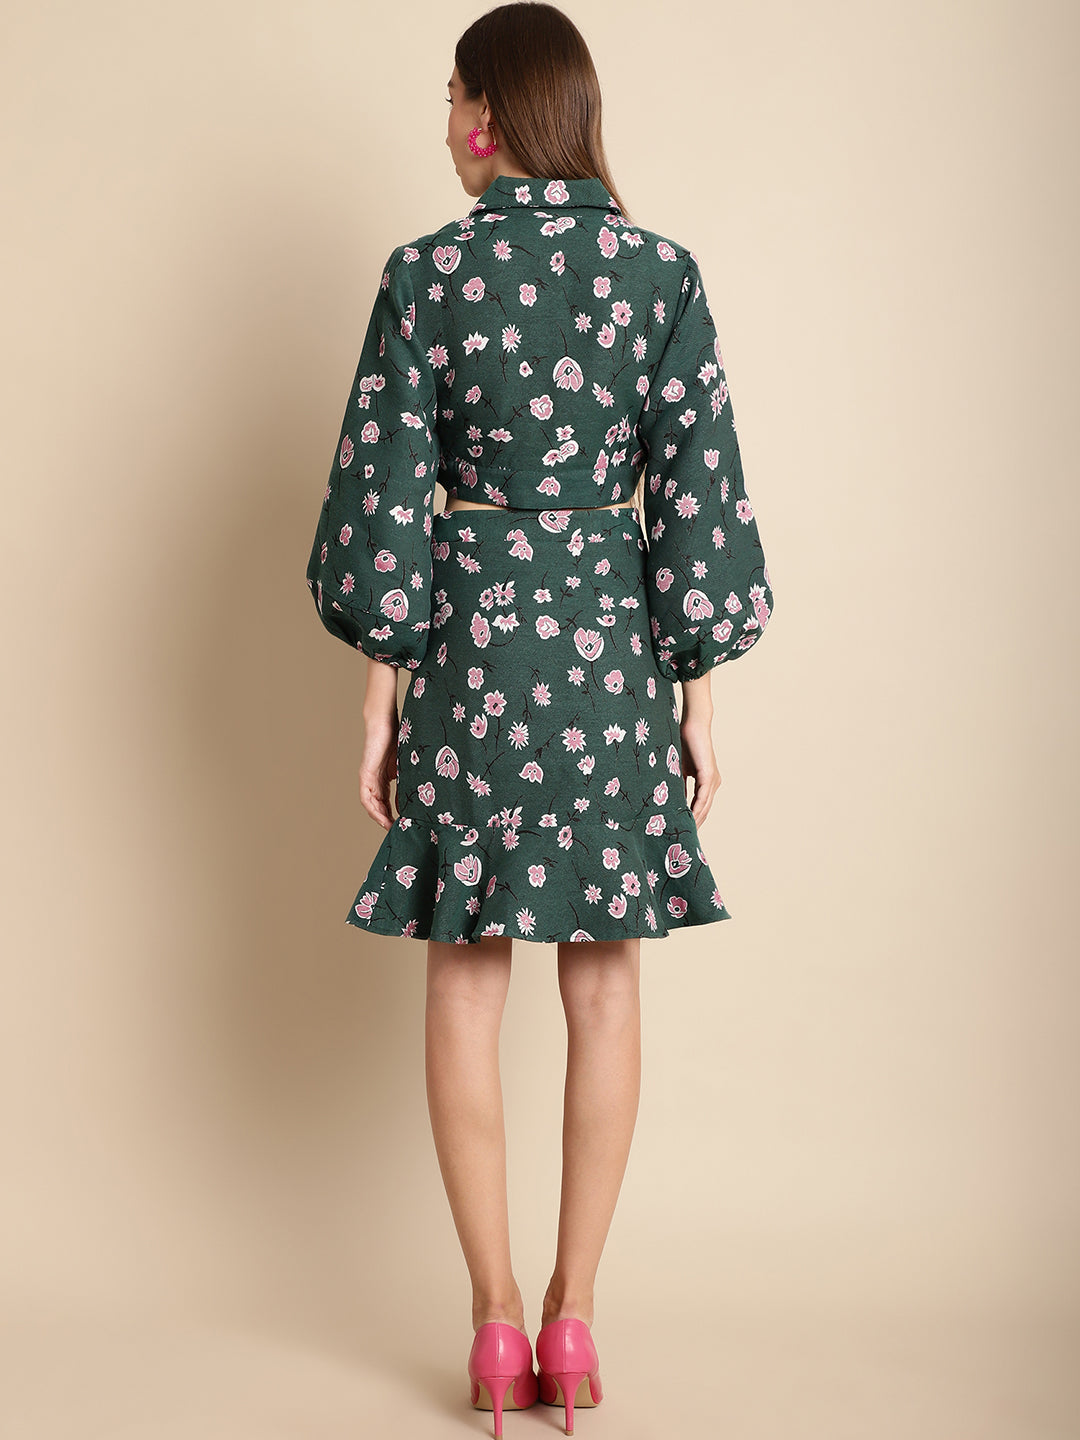 Blanc9 Jacquard Green Floral Jacket With Skirt Co-Ord Set-B9ST04